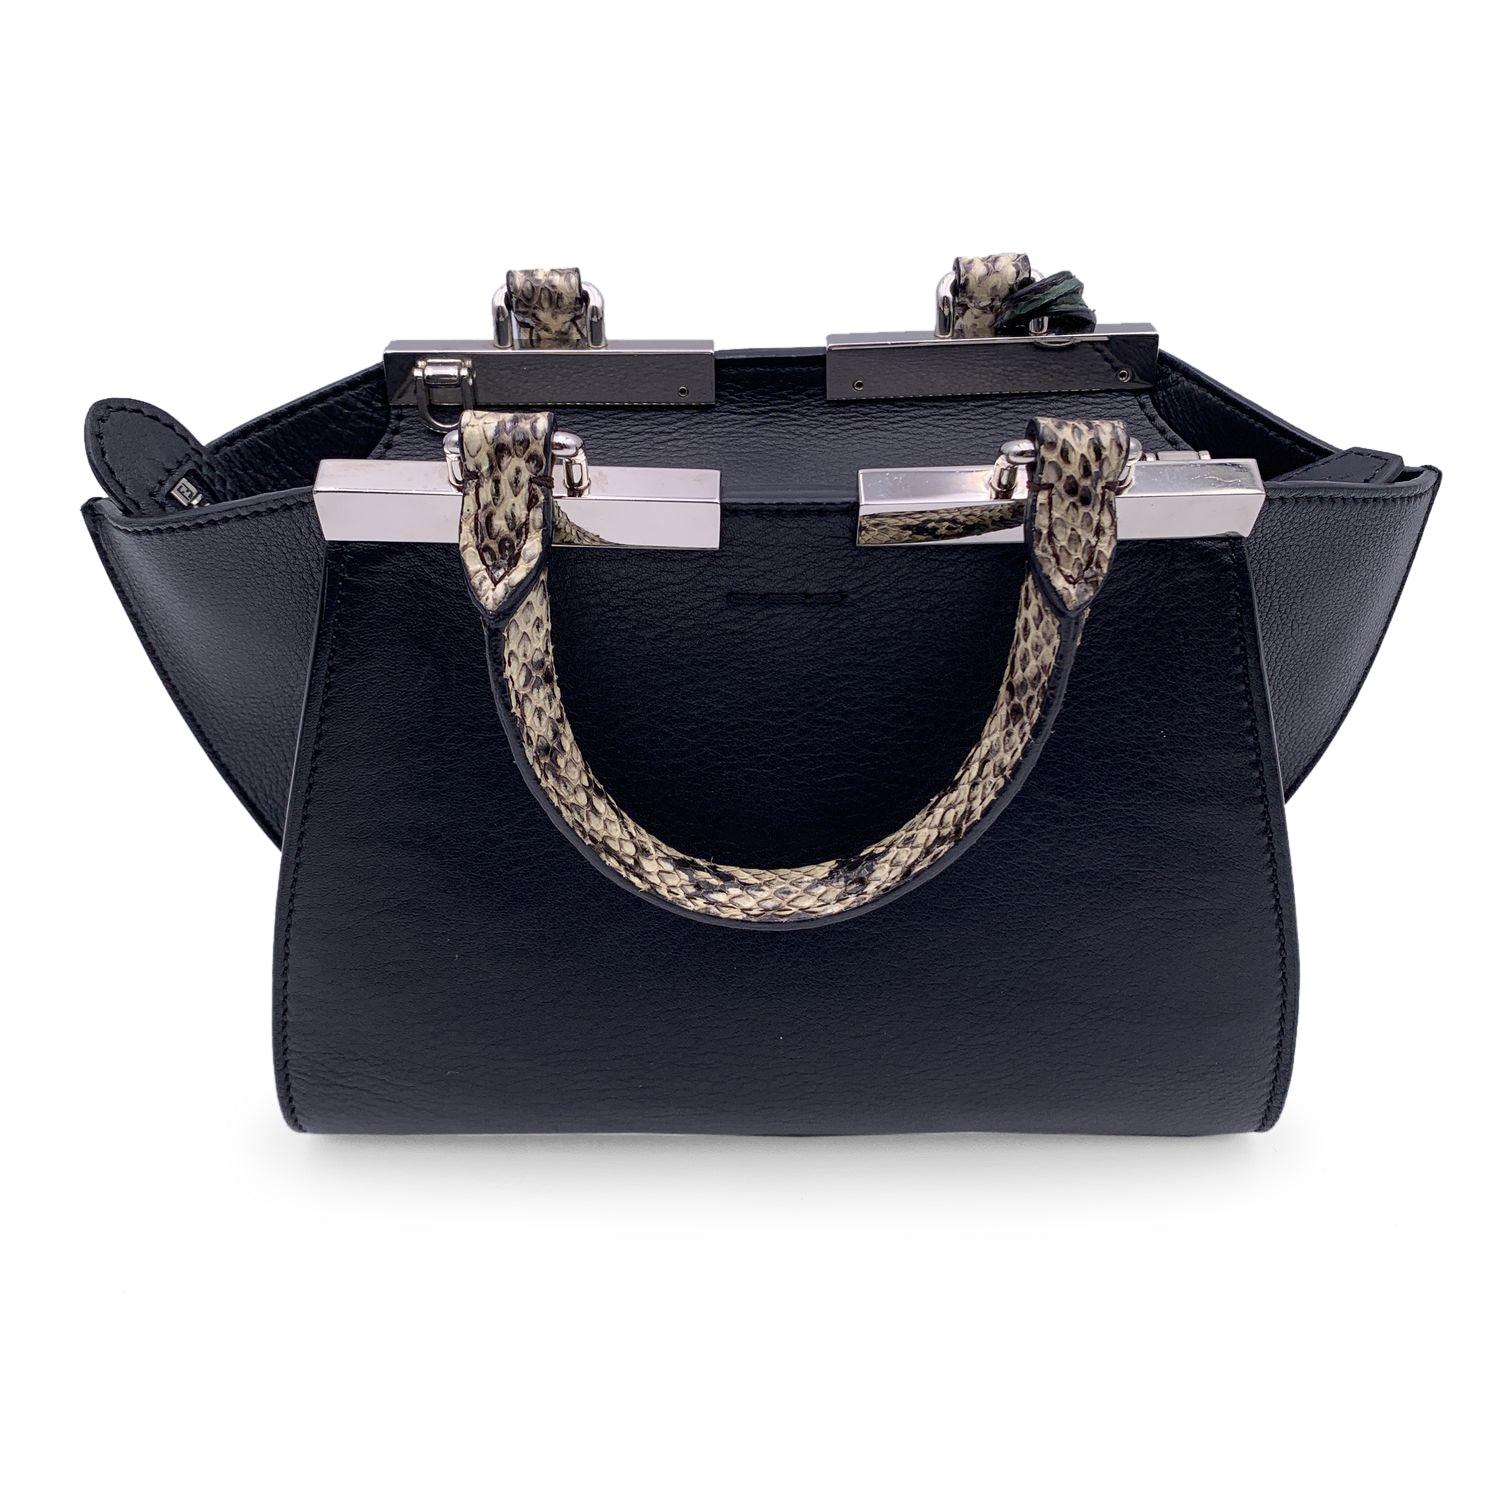 Fendi Black Leather Mini 3Jours Bag Contrast Details with Straps In Excellent Condition In Rome, Rome